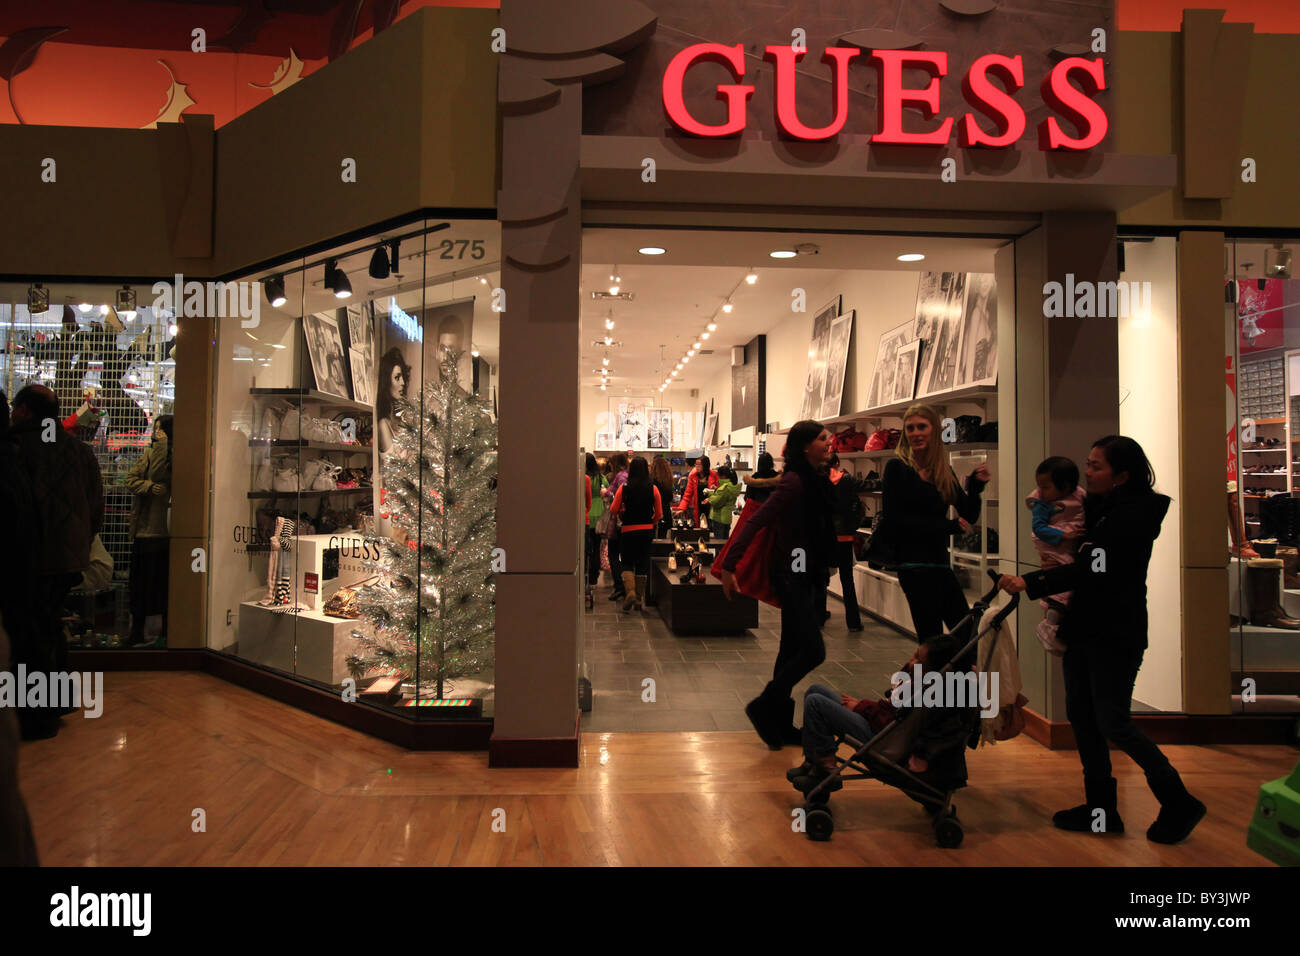 guess dresses outlet